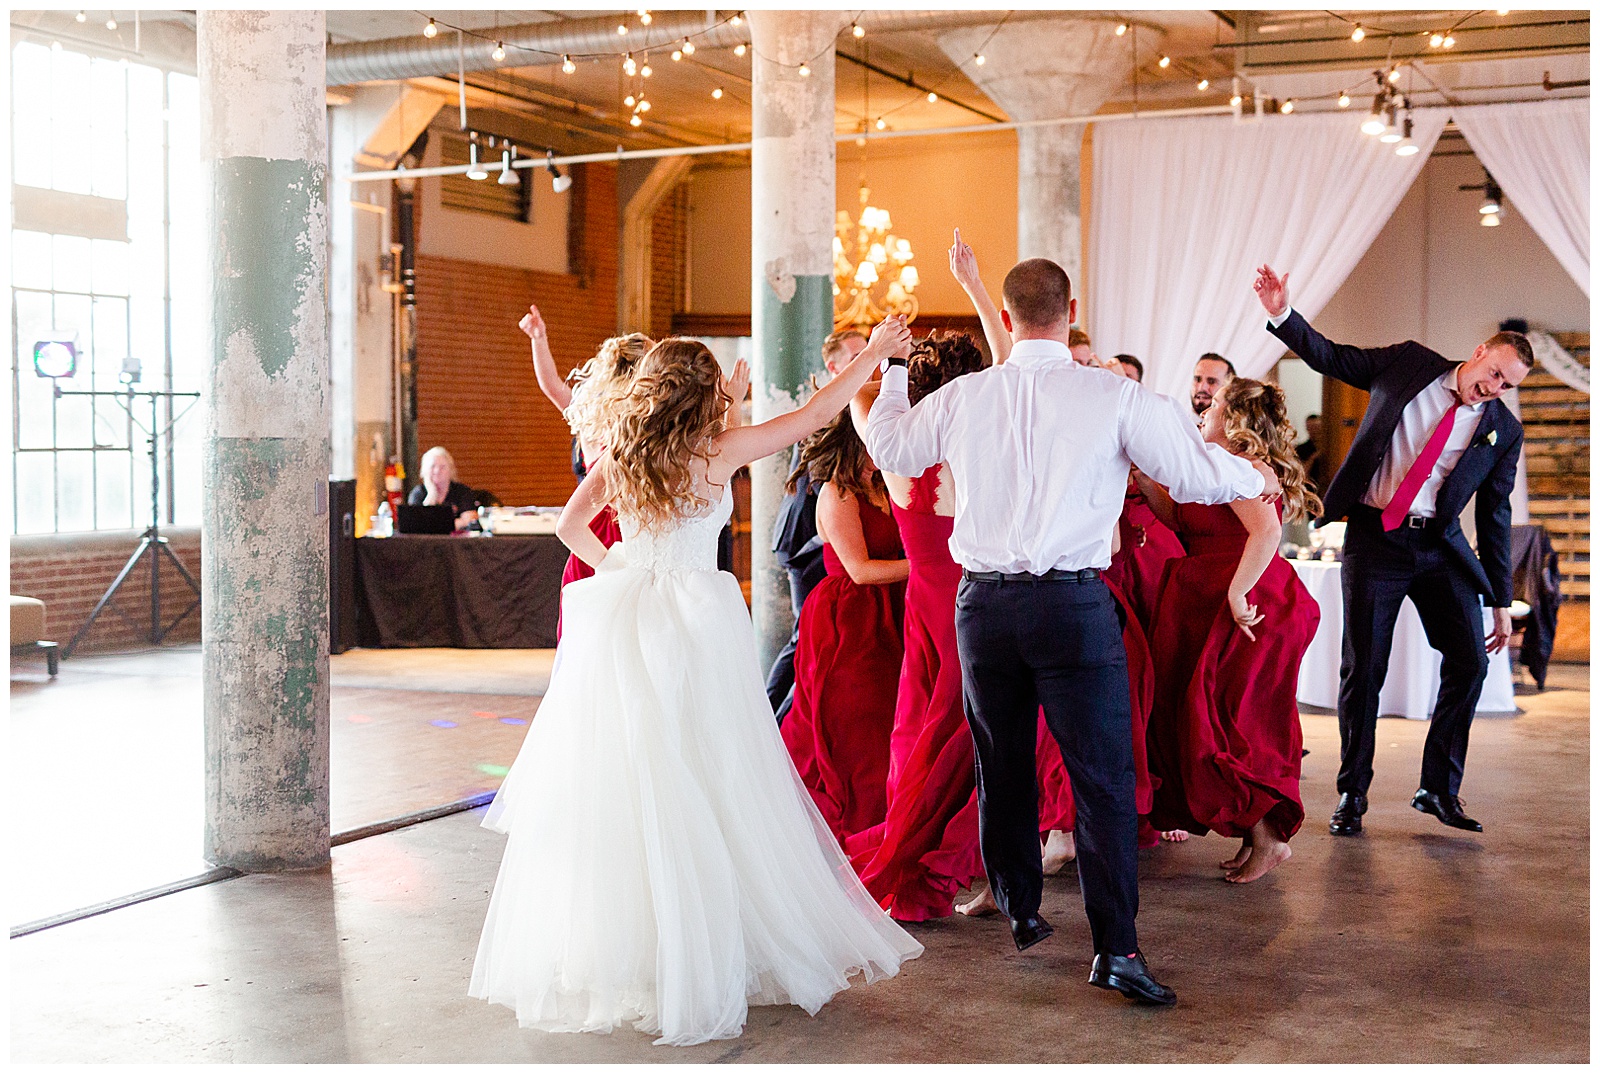 Bride Surprises Groom with Bridesmaid Dance at Rustic Airy Indoor Wedding Venue with fairy lights - Red-Themed Bridesmaid Dress Ideas from Elegant Modern Summer Wedding in Charlotte, NC | check out the full wedding at KevynDixonPhoto.com